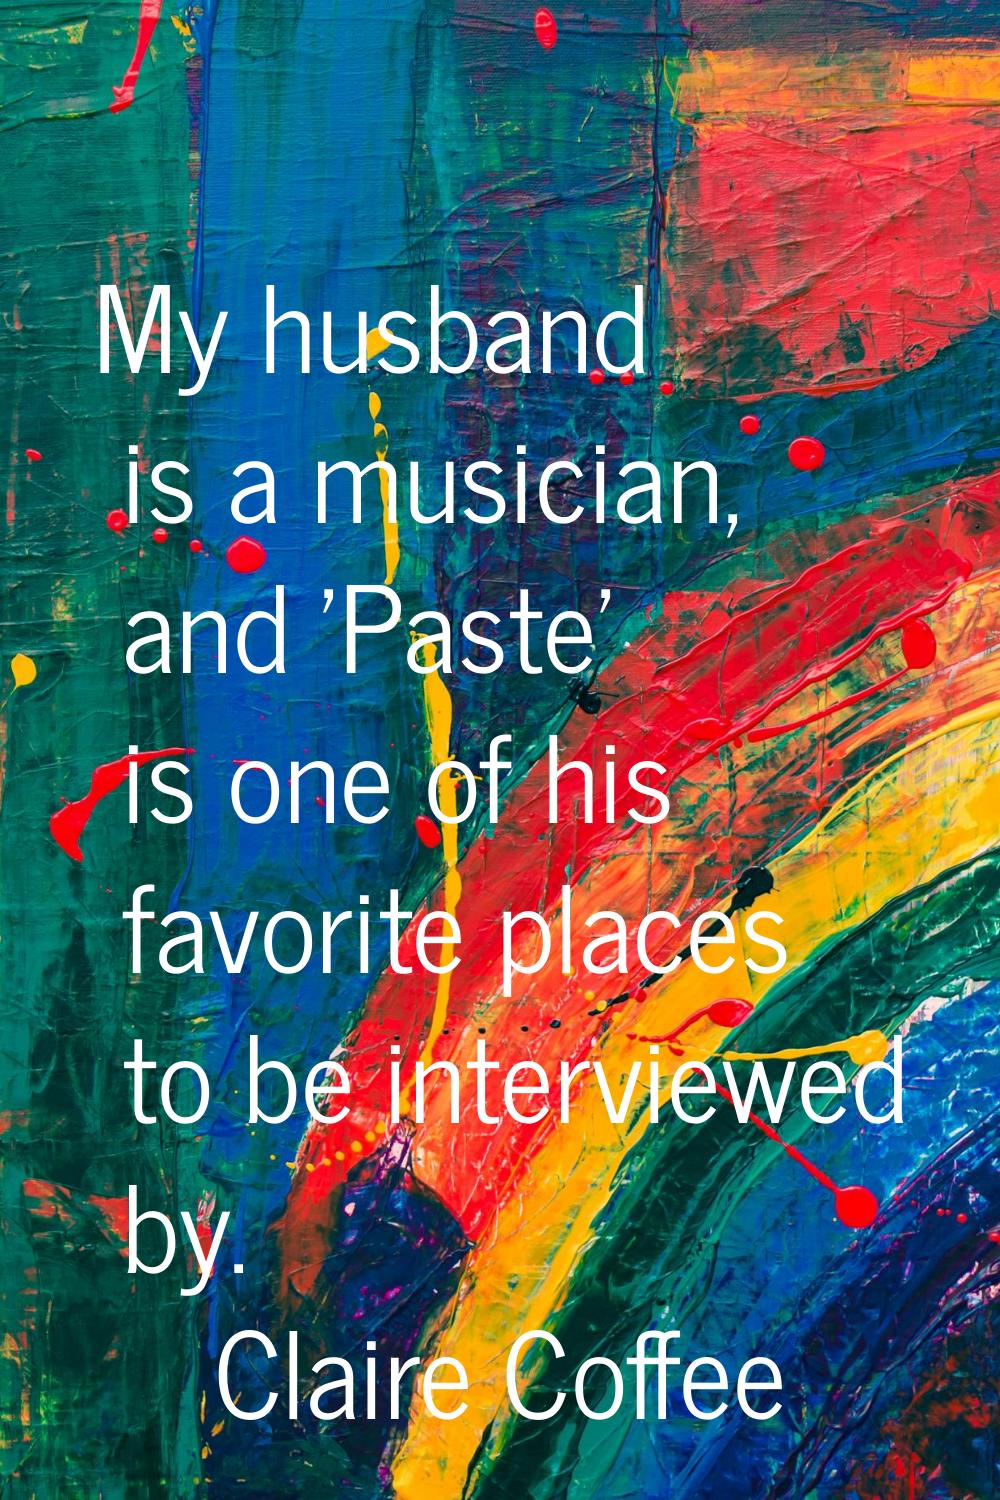 My husband is a musician, and 'Paste' is one of his favorite places to be interviewed by.